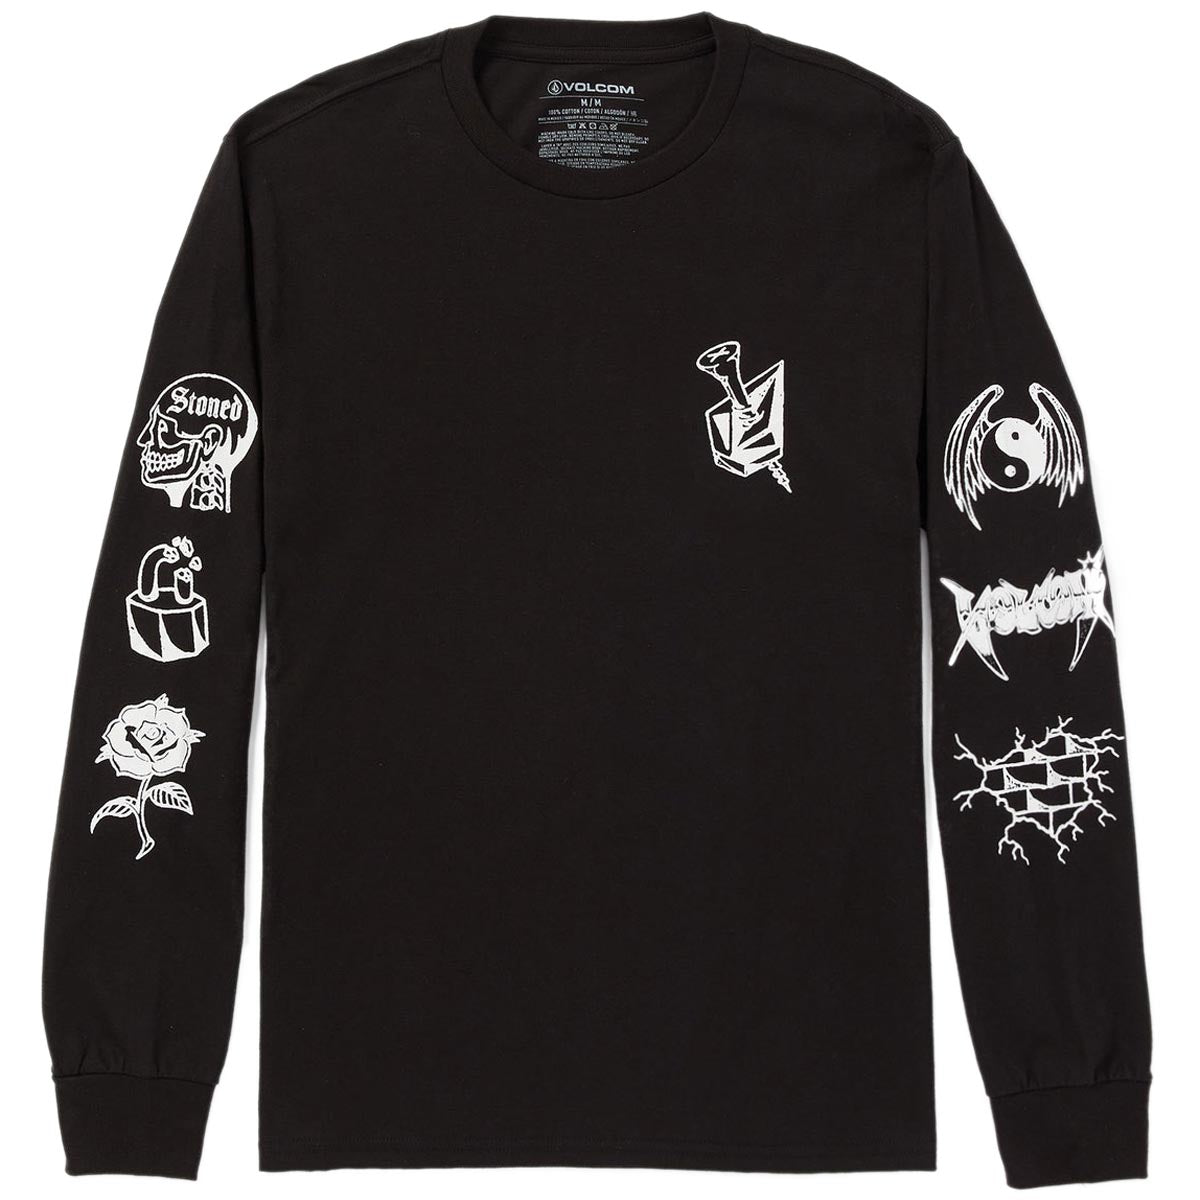 Volcom About Time Long Sleeve T-Shirt - Black image 1